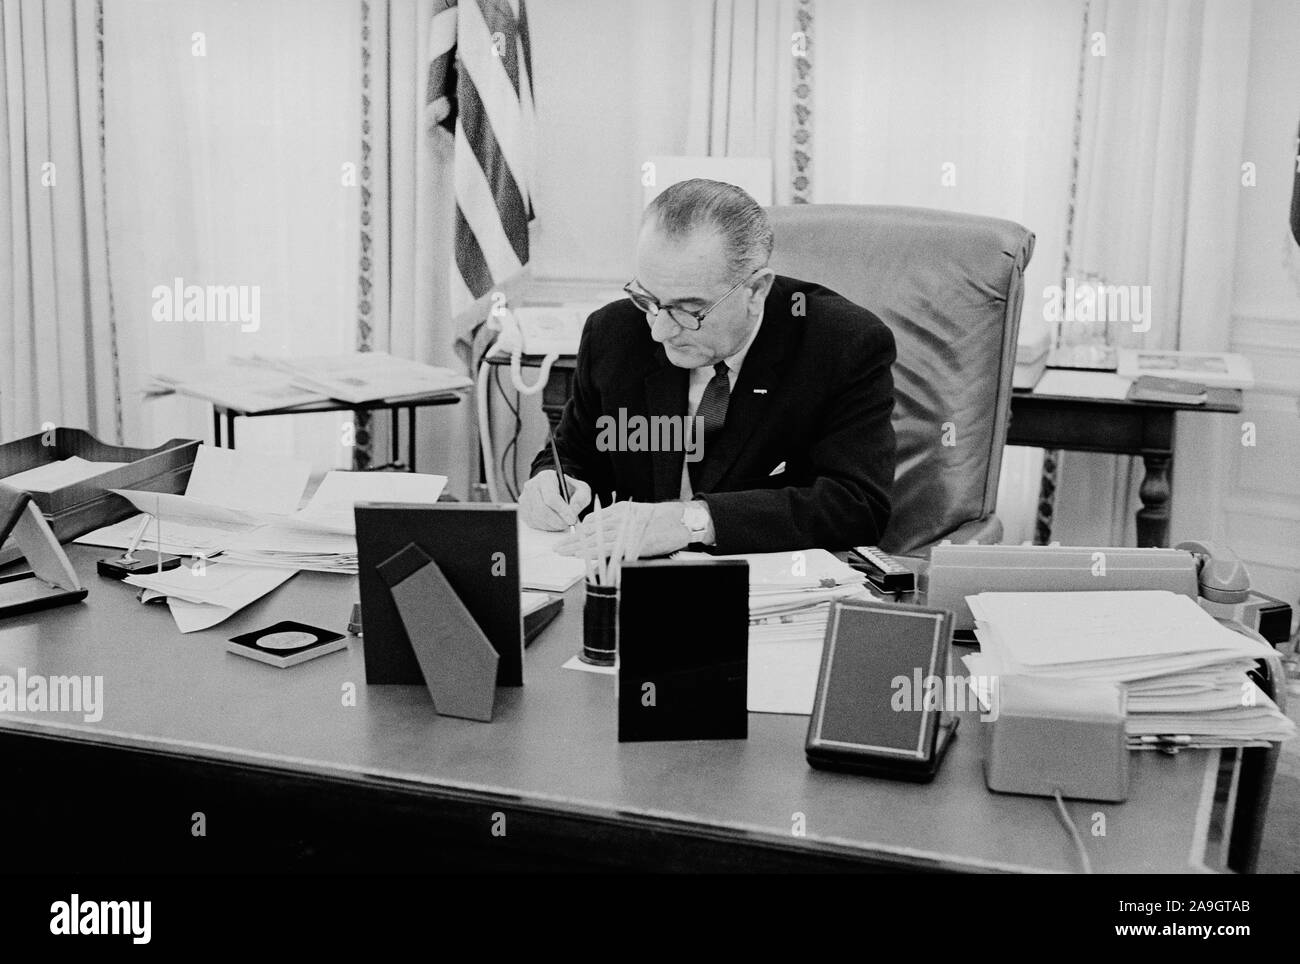 U.S. President Lyndon Johnson working at Desk in Oval Office in White House, Washington, D.C., USA, photograph by Thomas J. O'Halloran, February 1964 Stock Photo